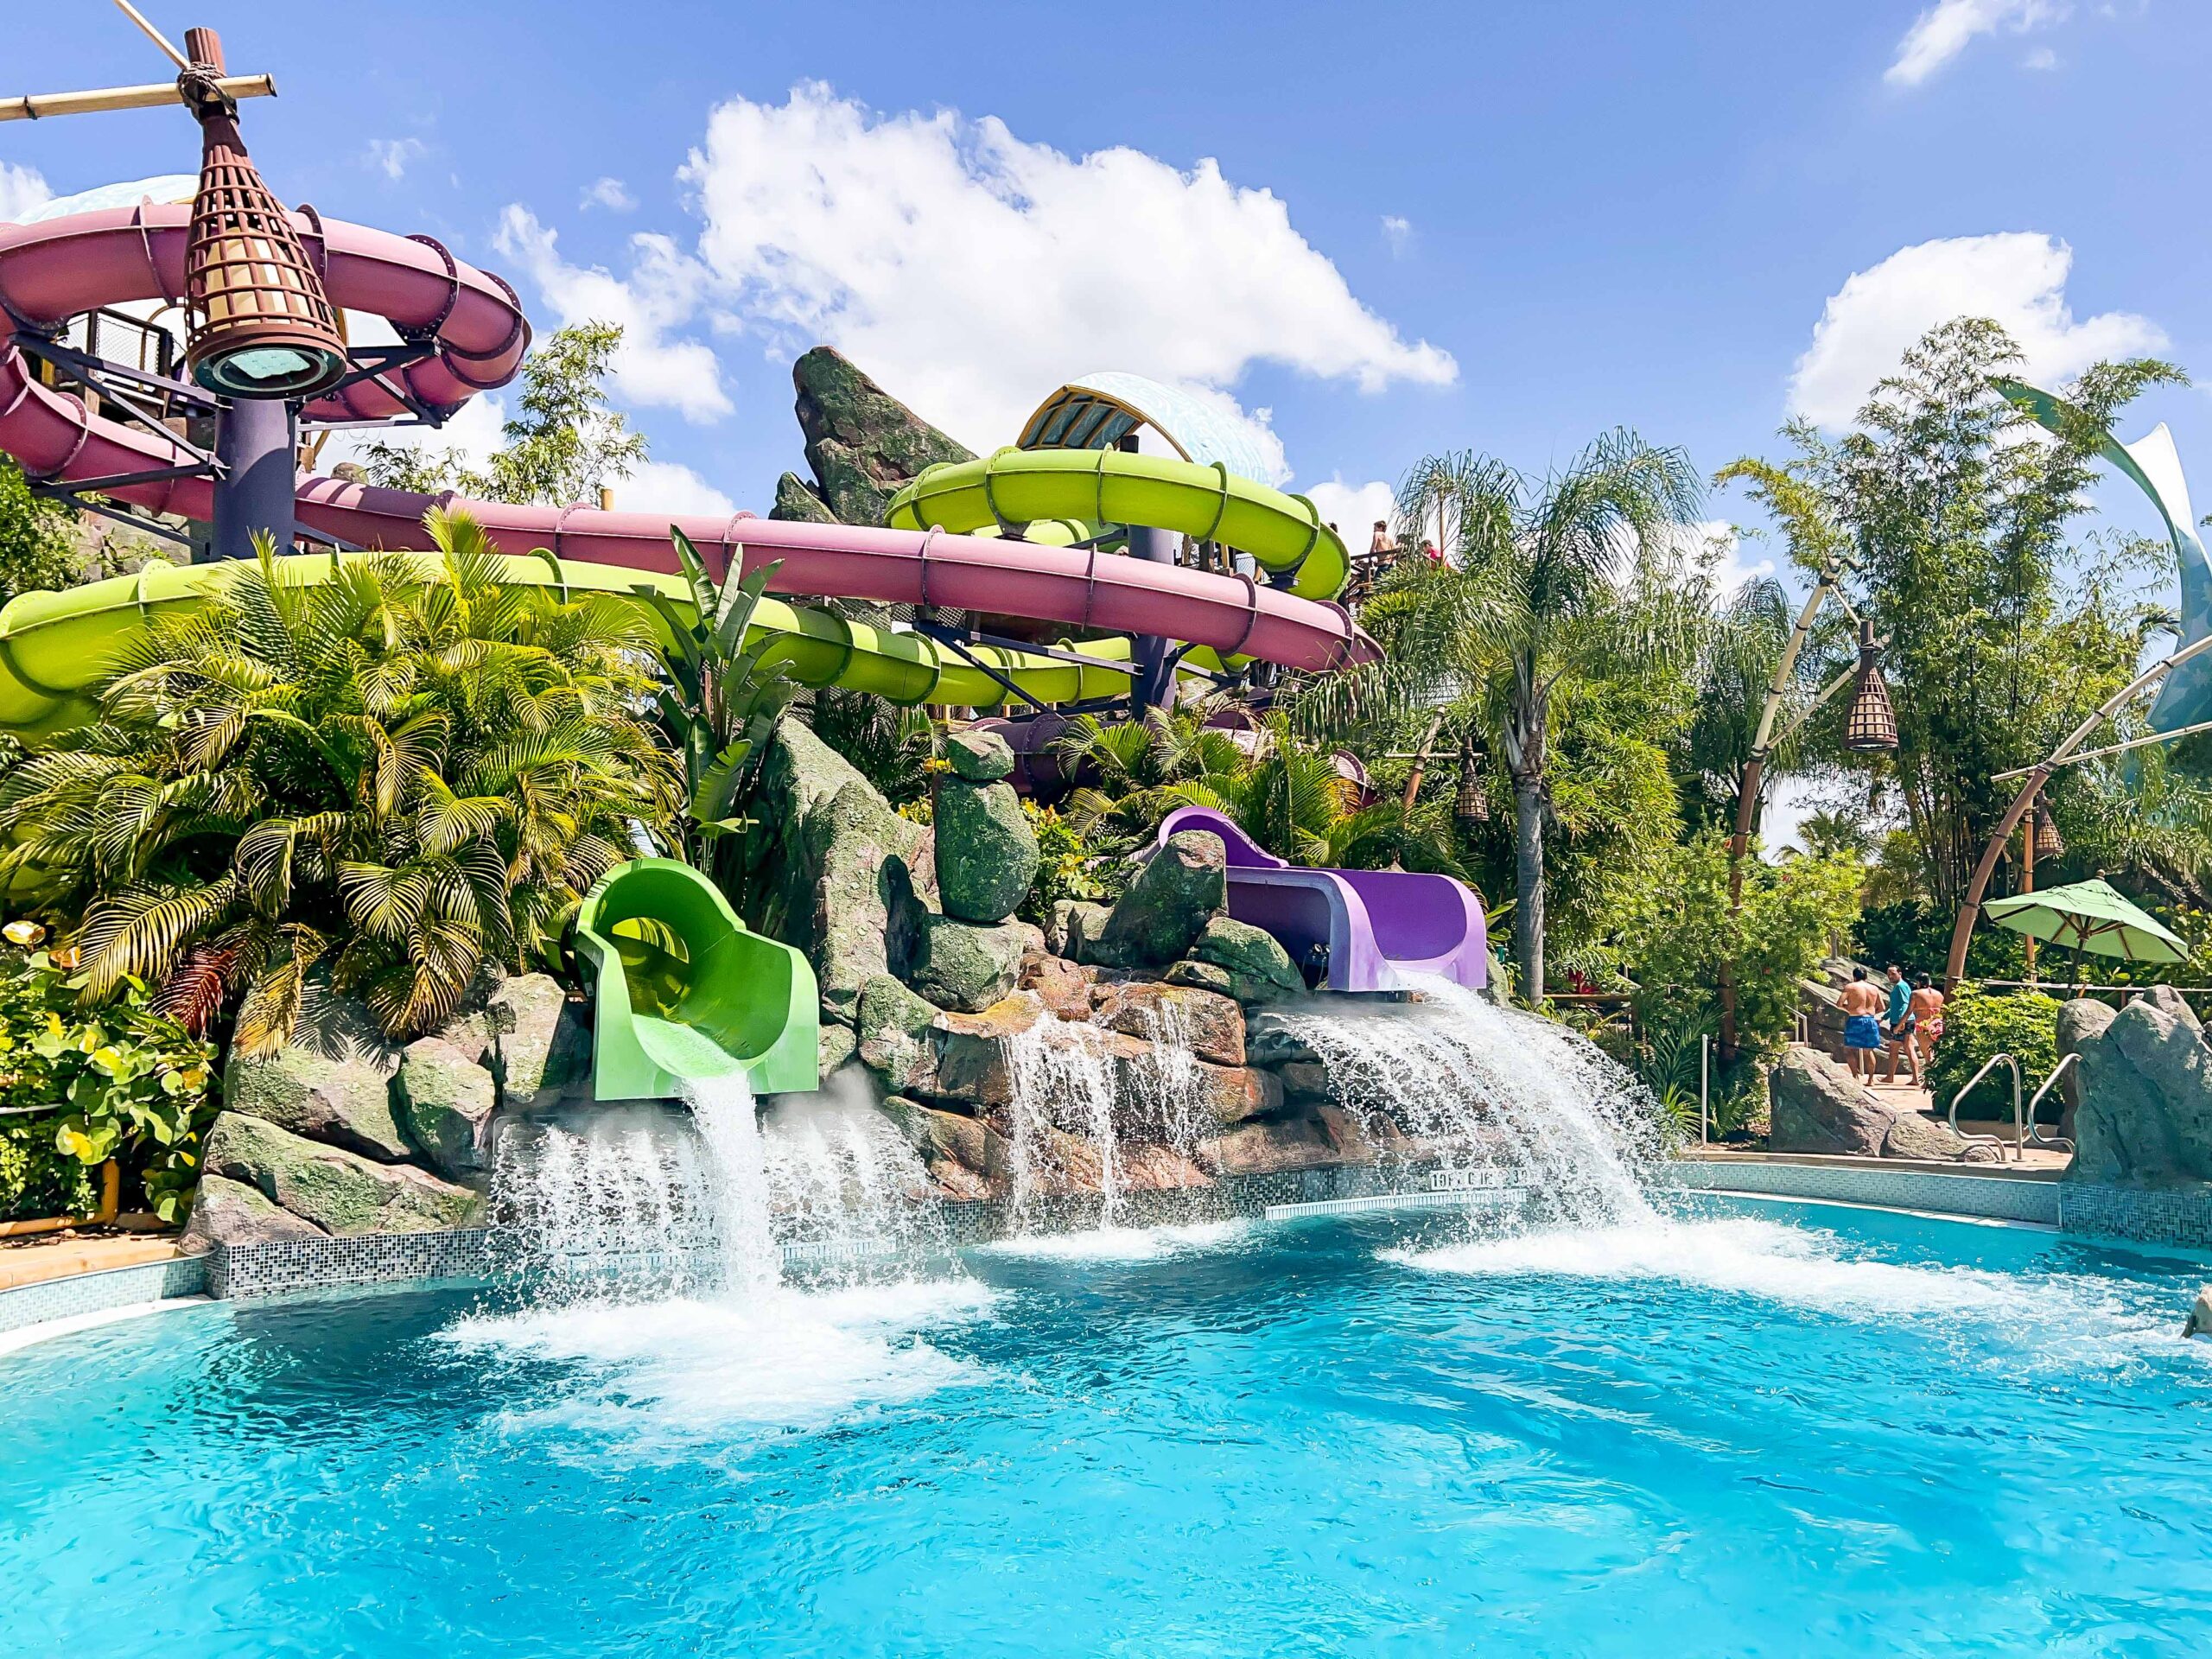 Volcano Bay Discount Tickets Are The Perfect Way To Spend Summer